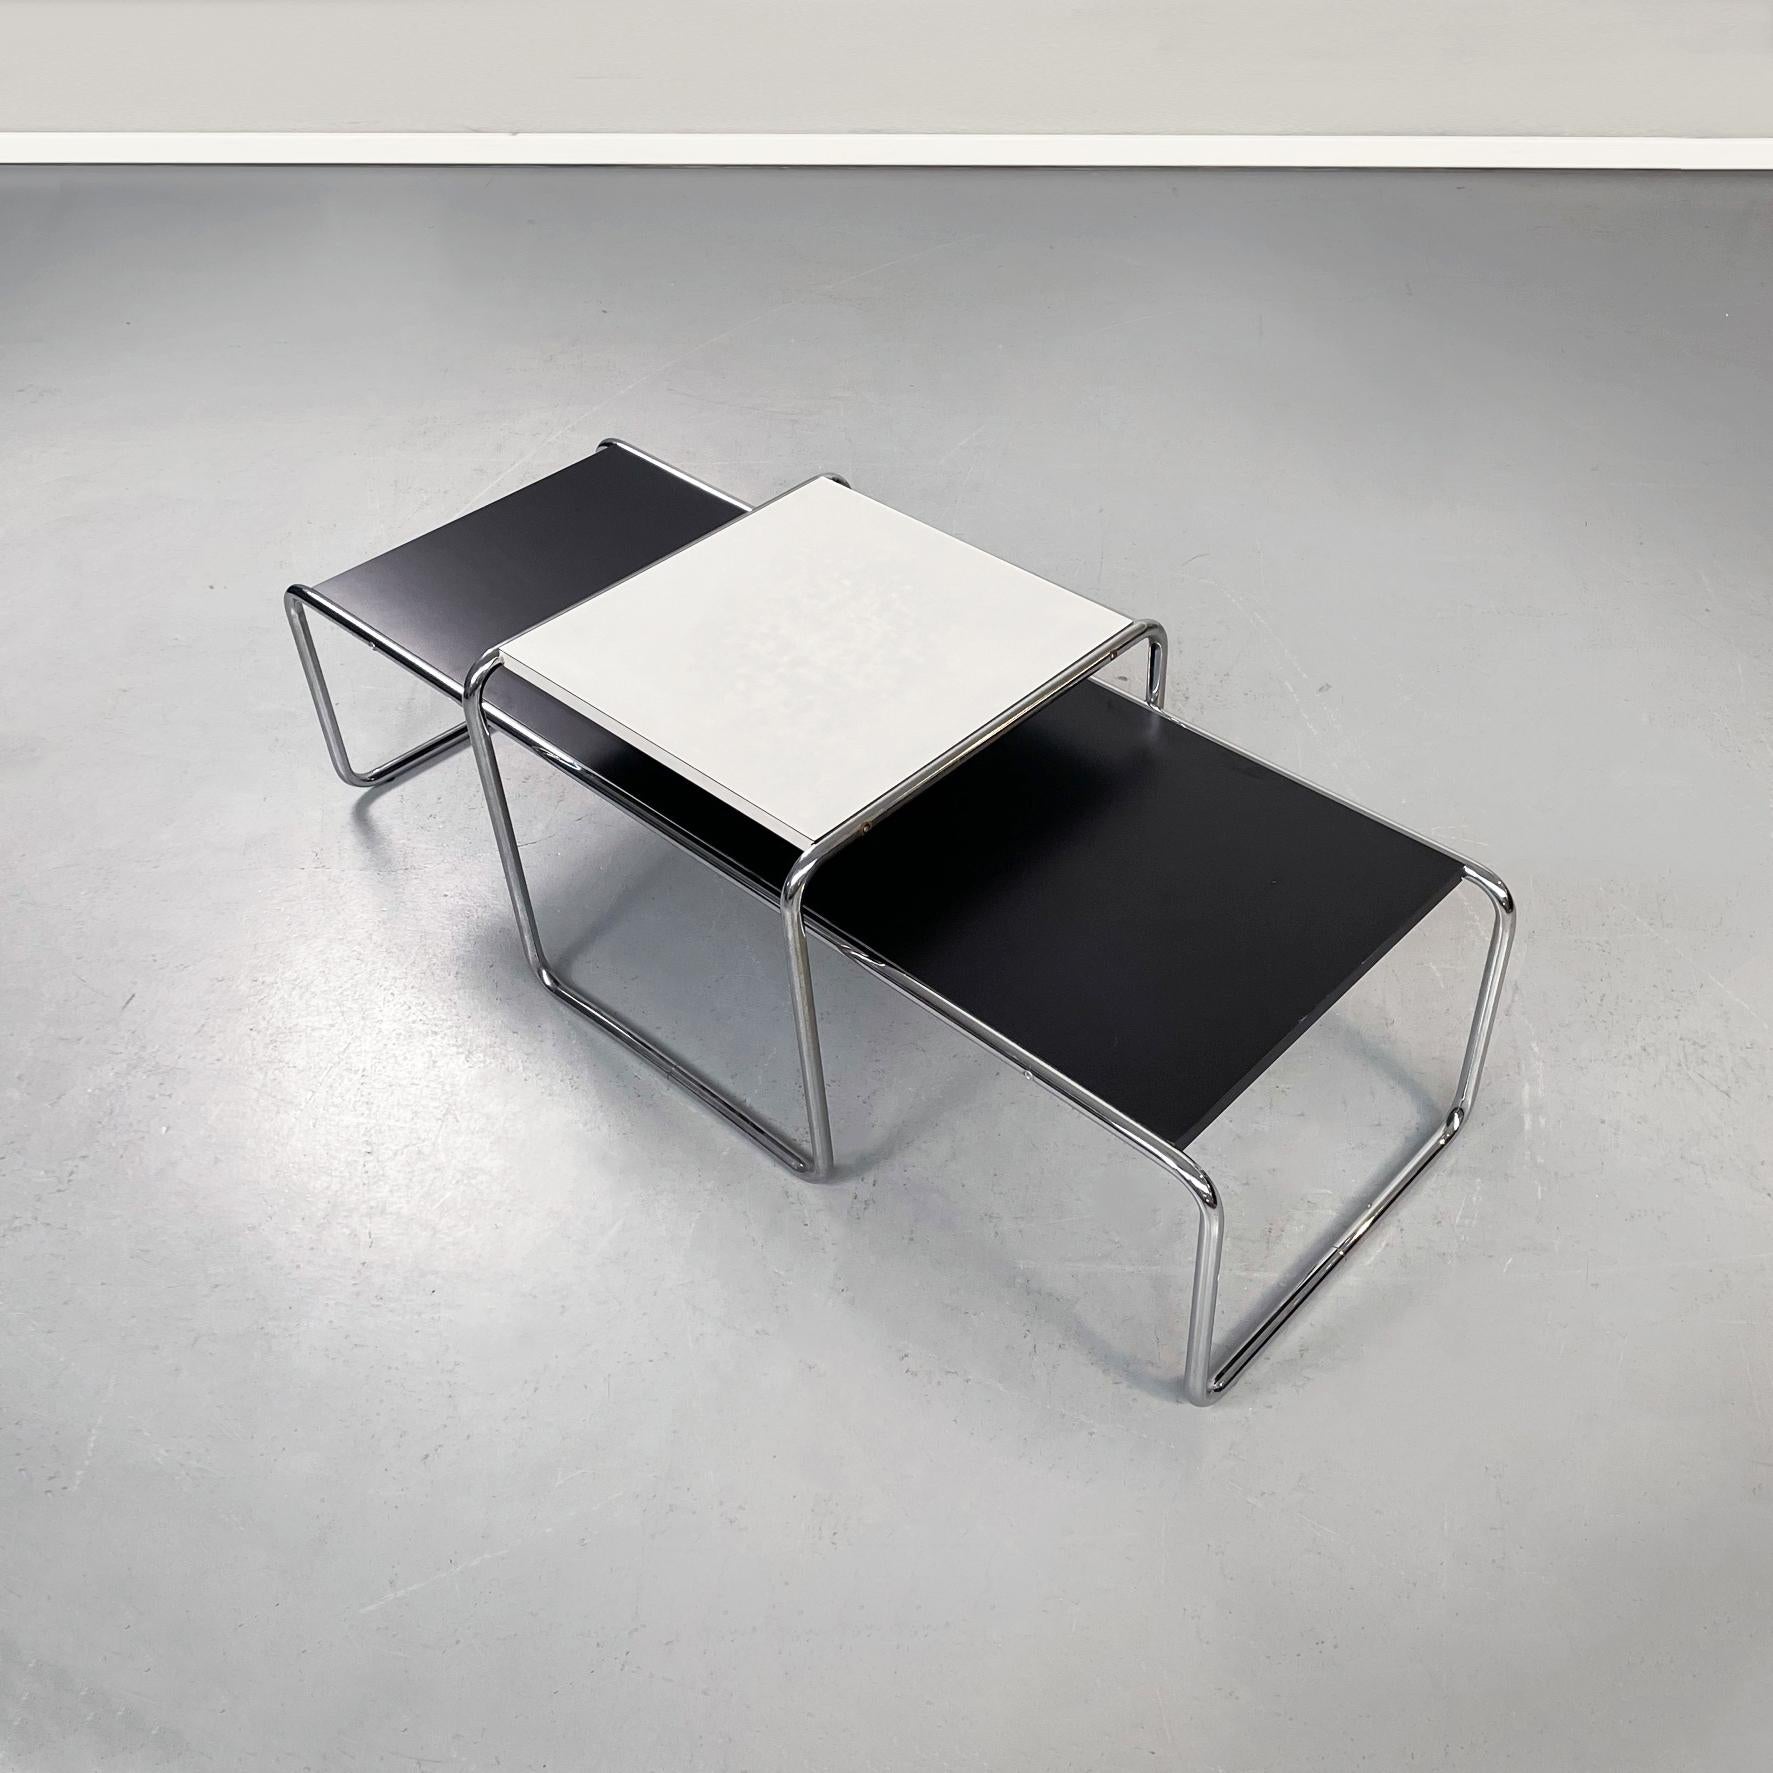 Italian mid-century Pair of Laccio coffee tables by Breuer for Gavina, 1970s
Pair of Laccio coffee tables with wooden top, one black rectangular and the other white square. The tubular structure is in chromed steel. The tables are